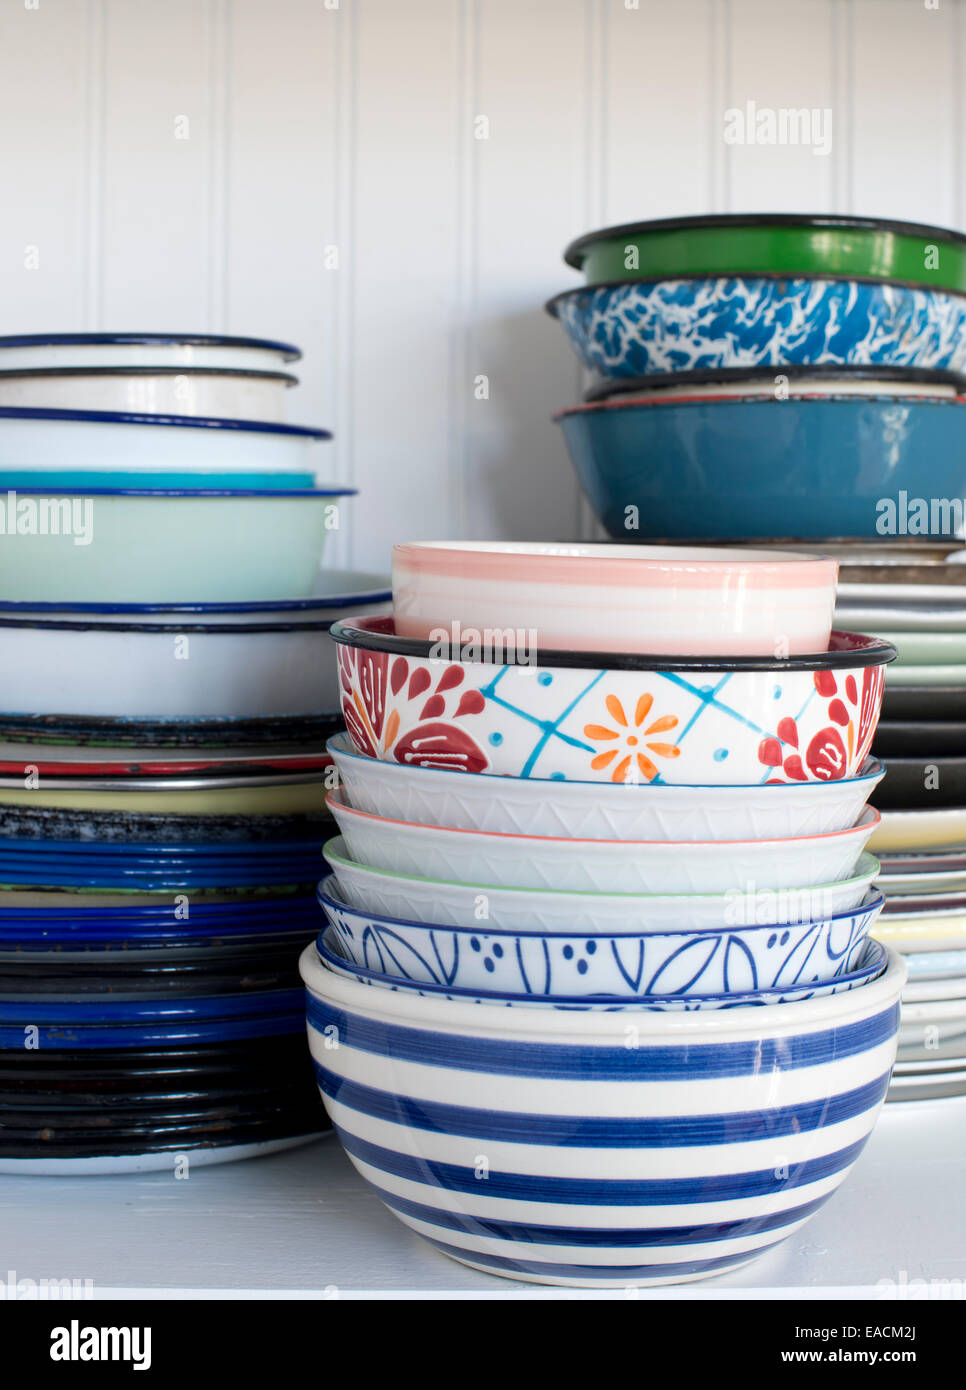 Pile of old dishes and bowls on a white shelf Stock Photo